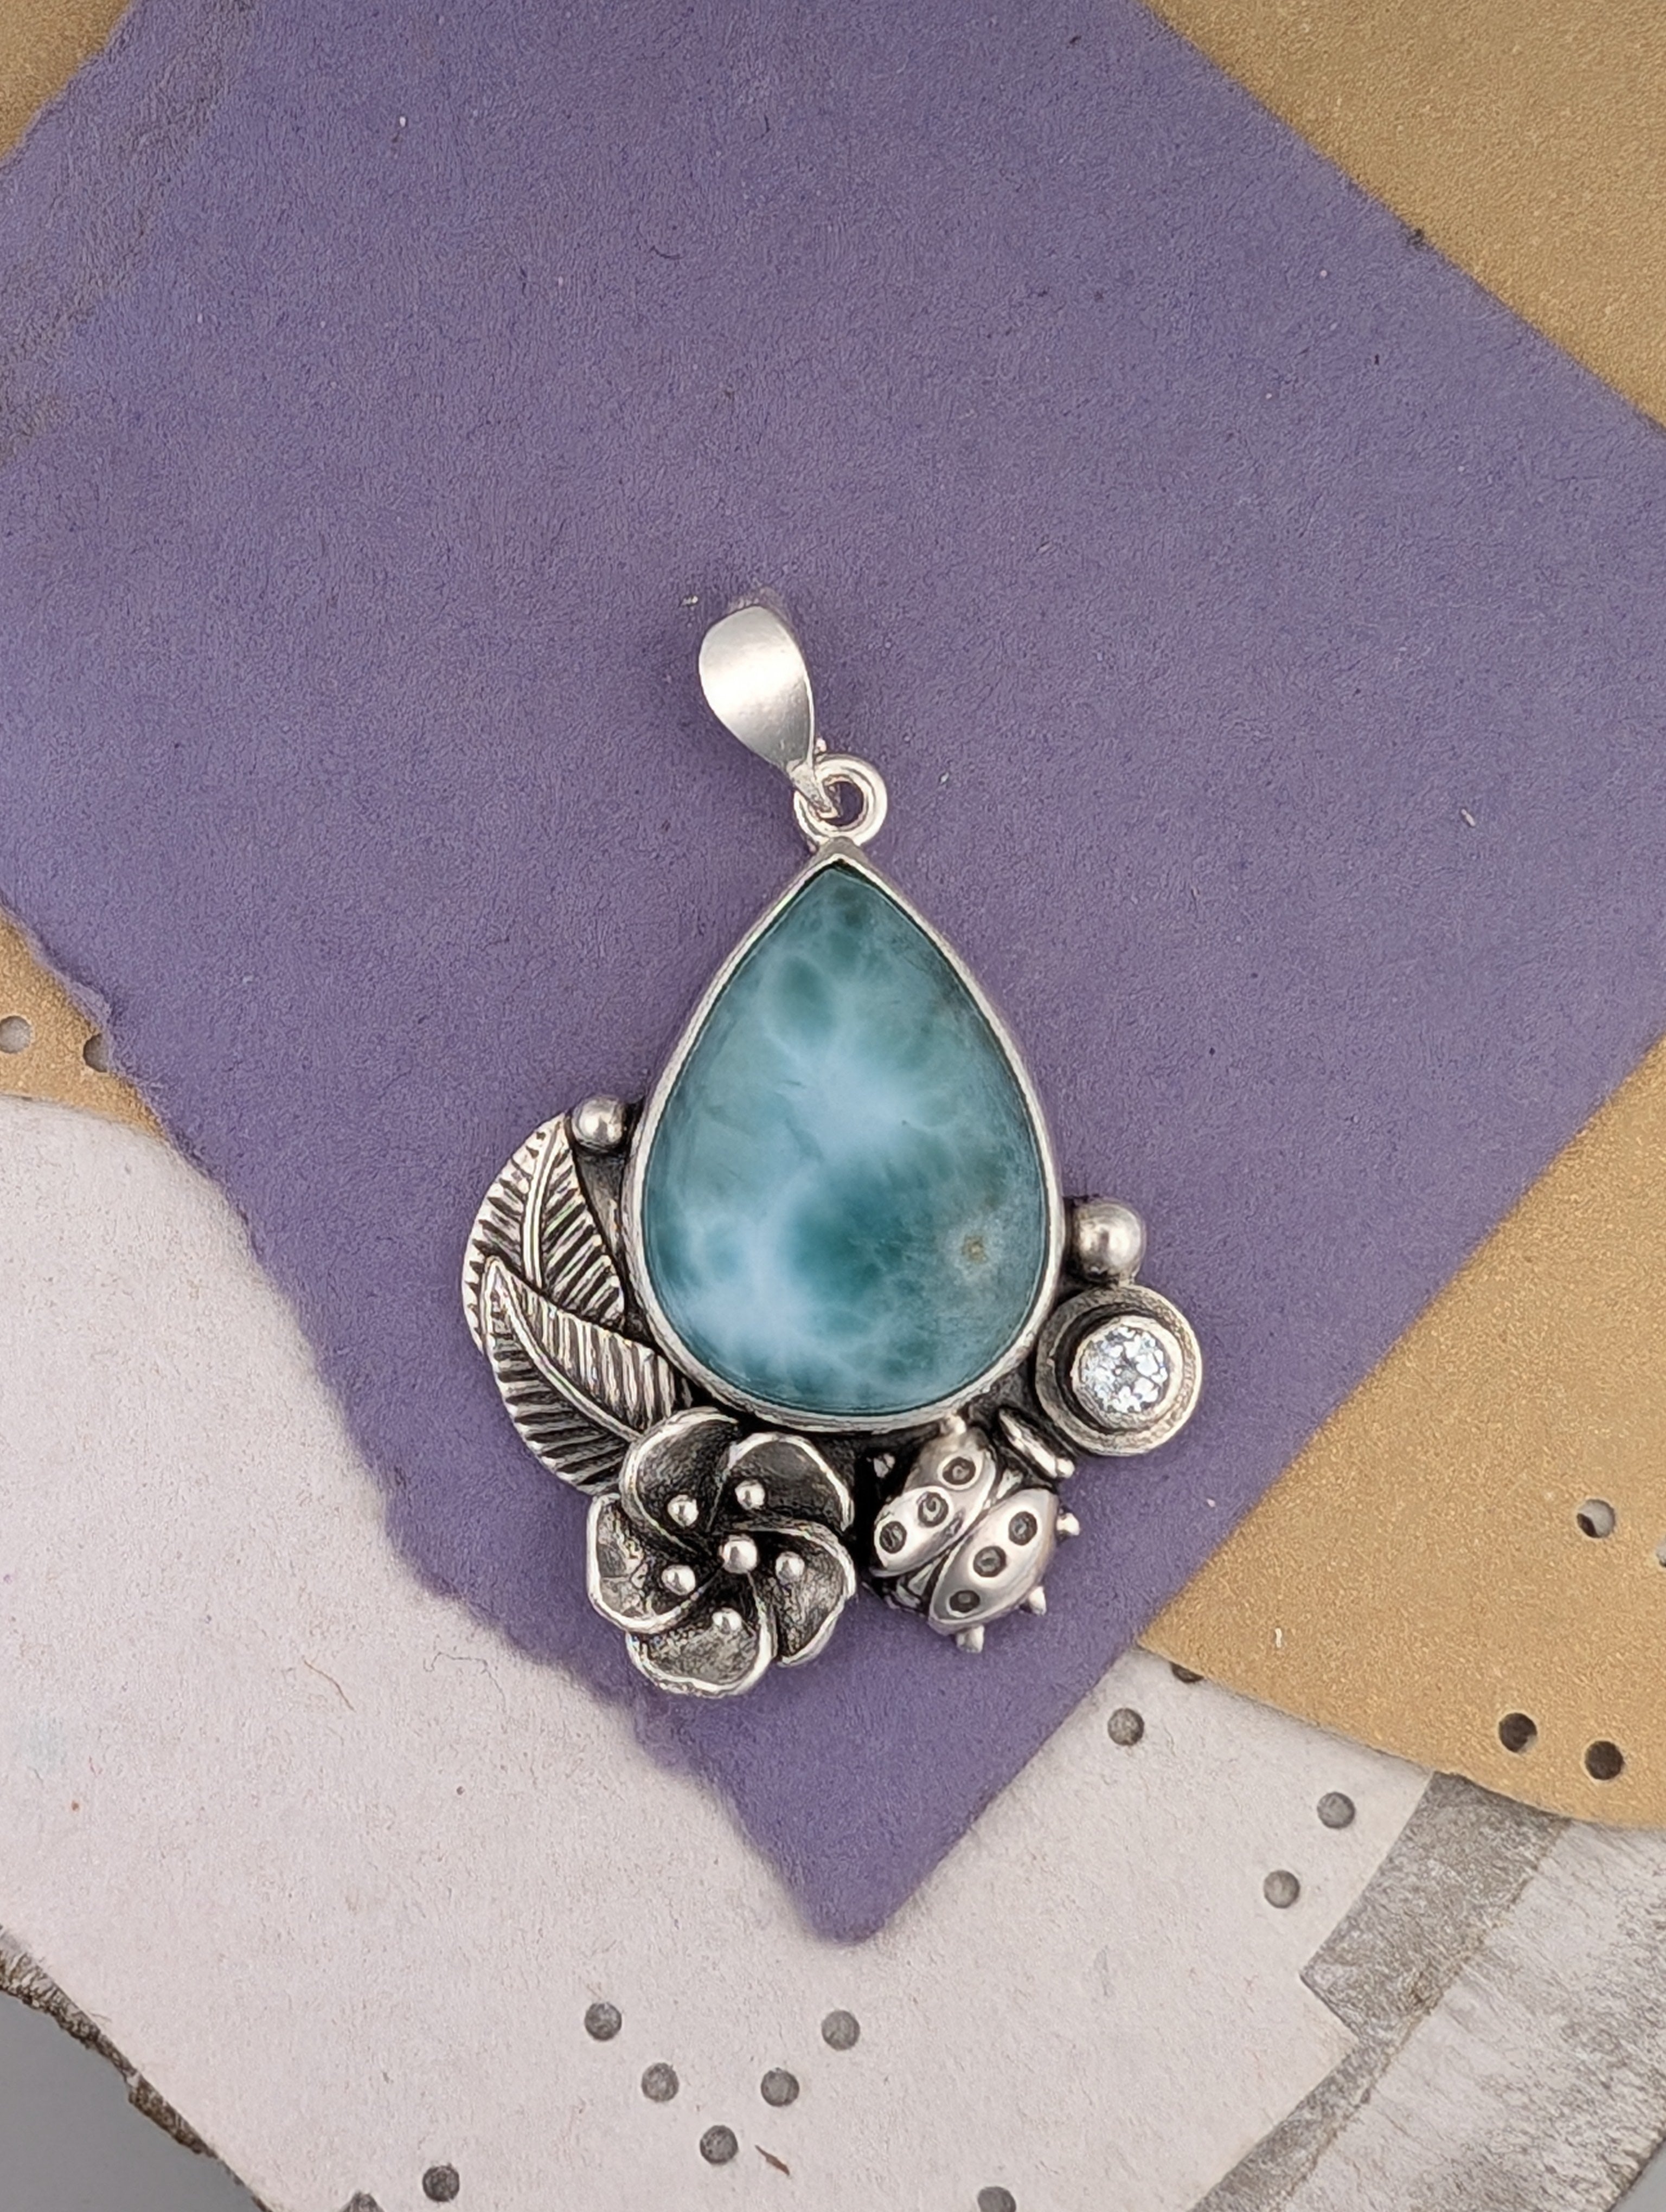 Larimar and Sky Blue Topaz Sterling Silver Pendant, #3